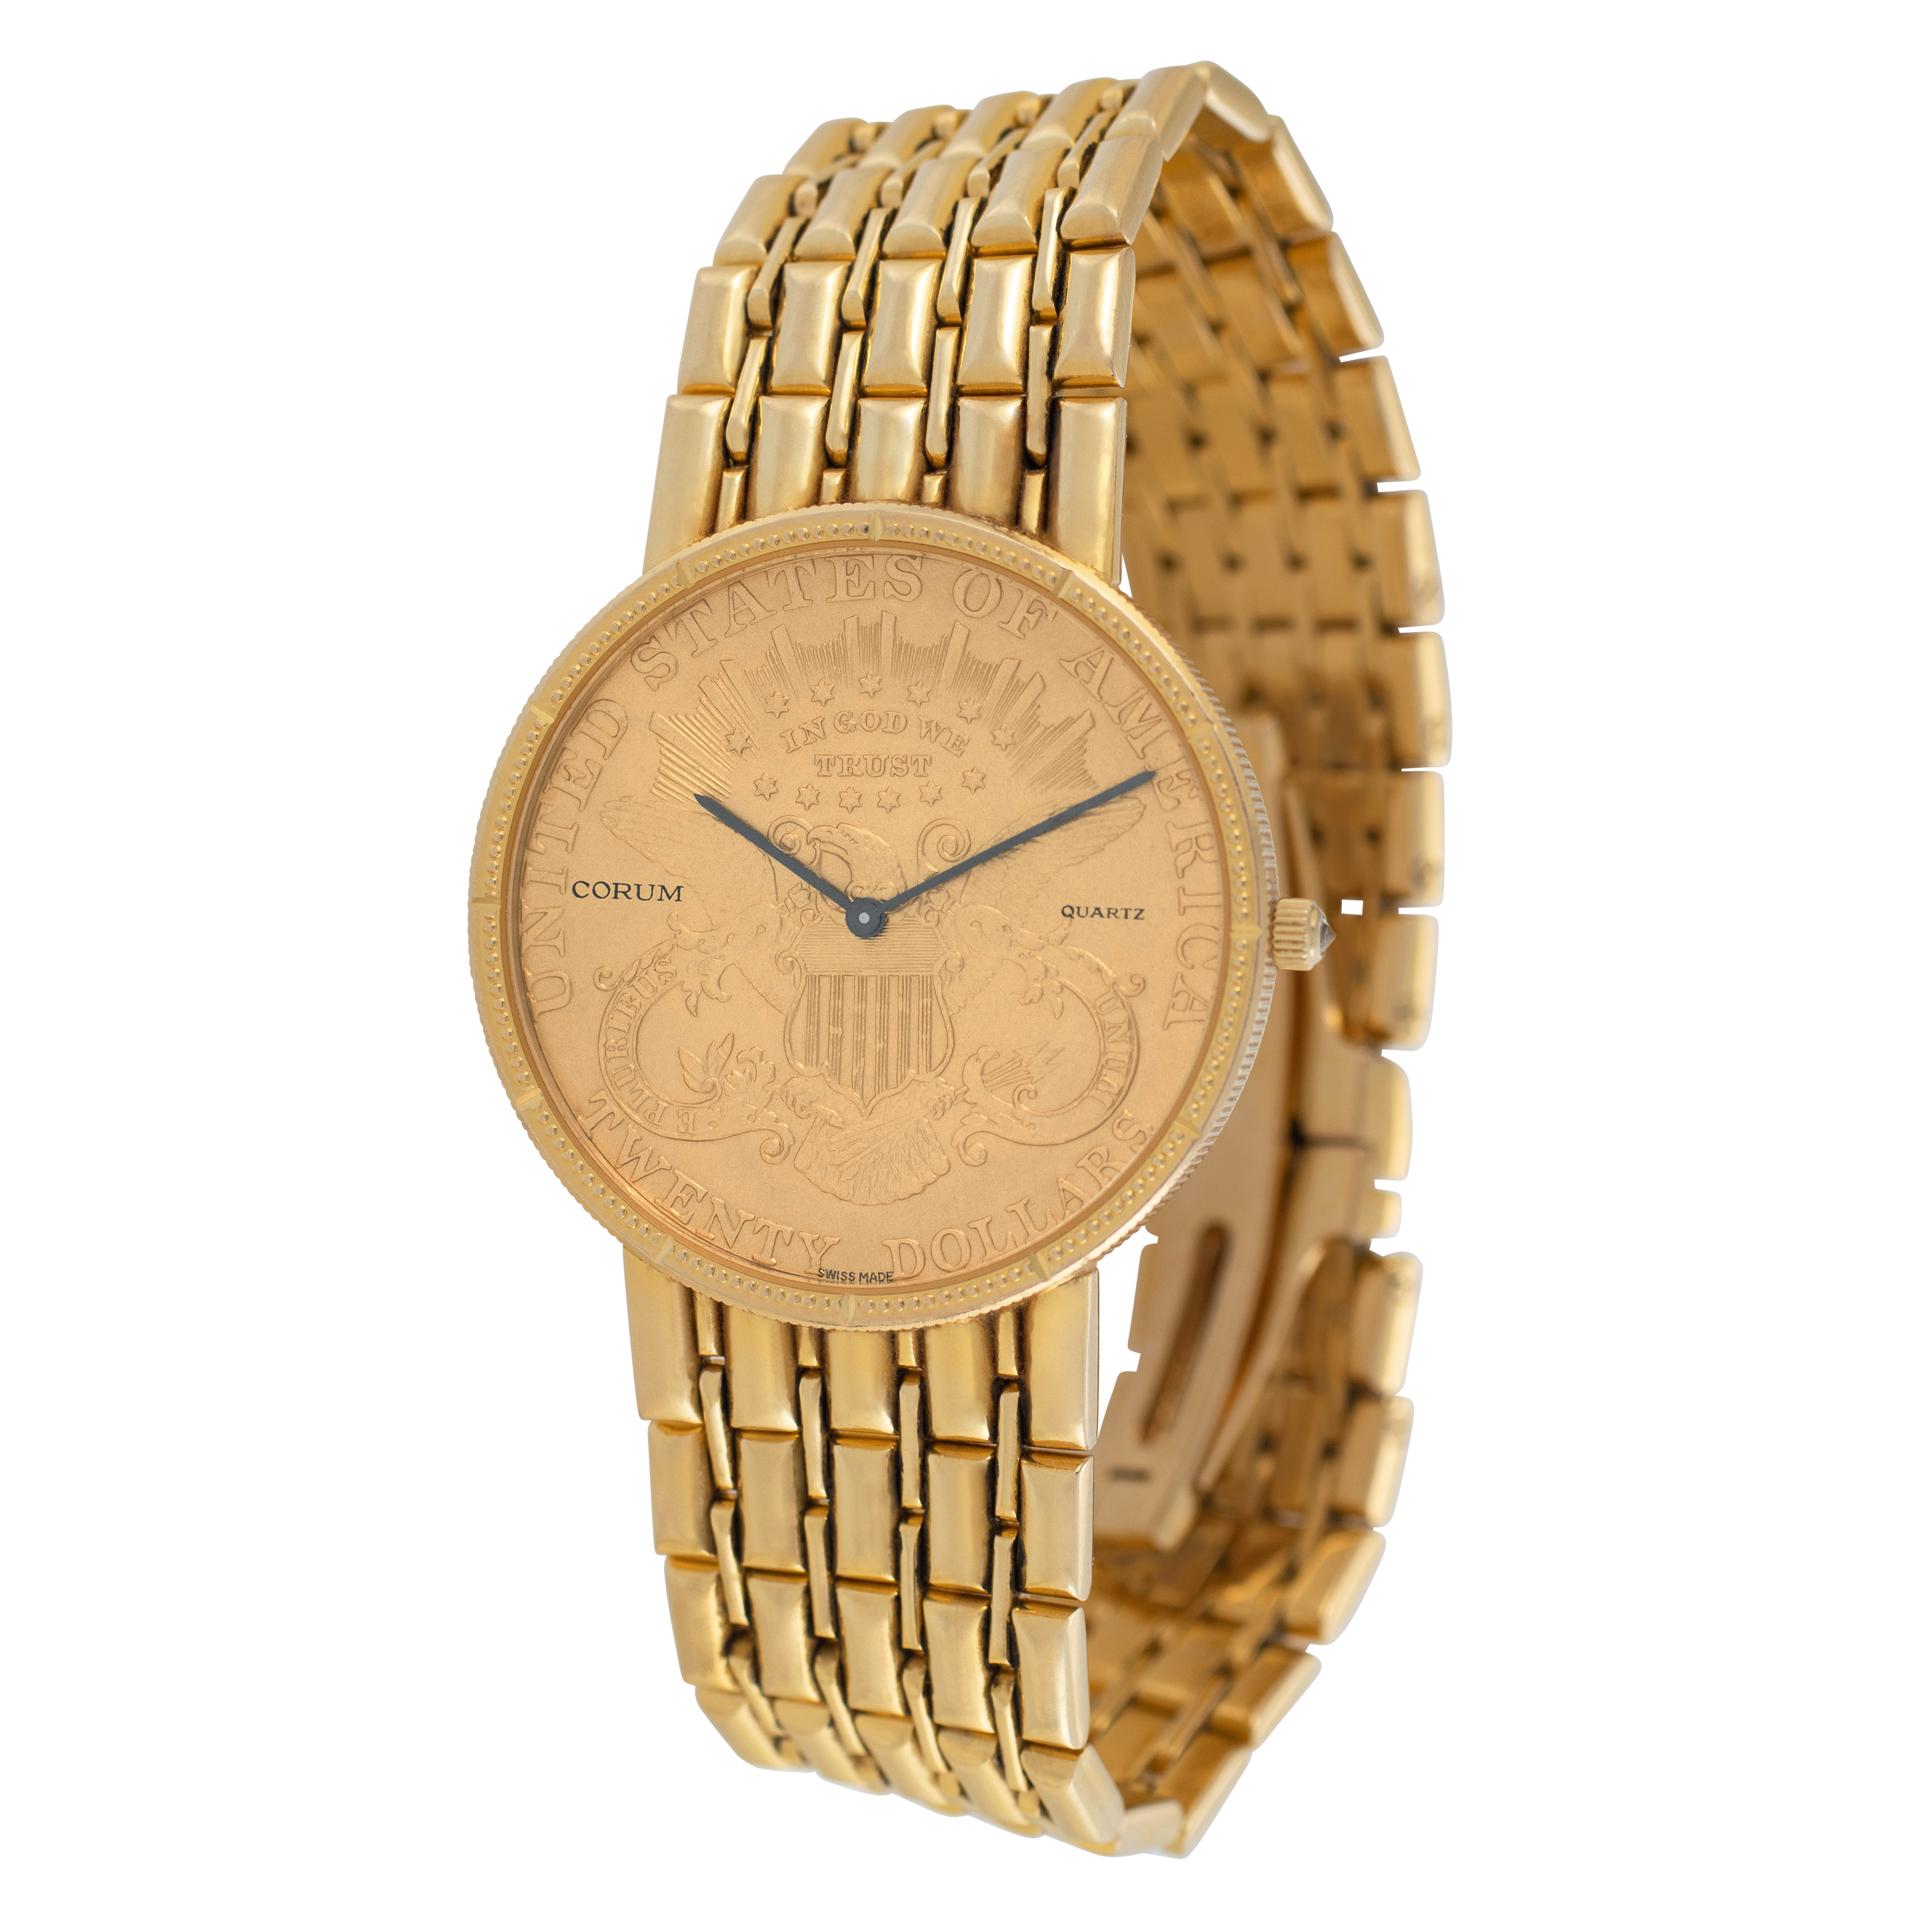 Corum $20 gold piece in 18k yellow gold on an 18k gold link bracelet with a hidden clasp. Quartz. 35 mm case size, fits up tp 7.25'' wrist. Fine Pre-owned Corum Watch. Certified preowned Classic Corum $20 gold piece watch is made out of yellow gold